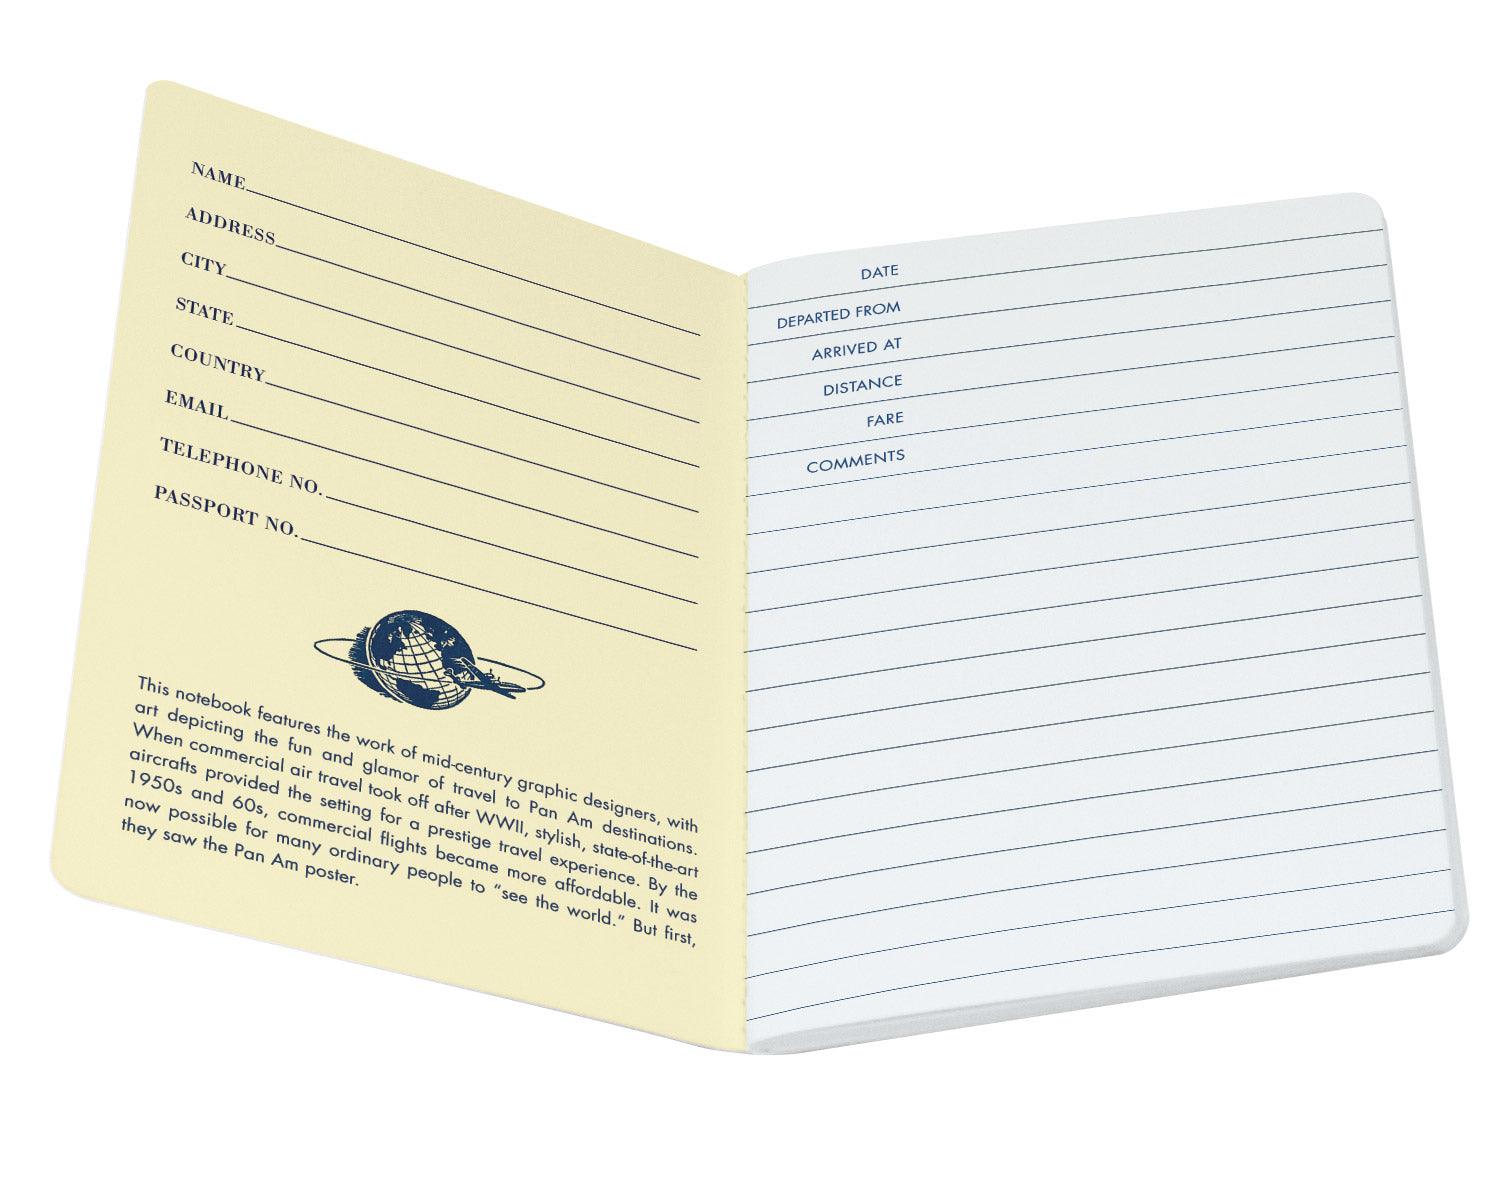 Product photo of Pan Am New York Notebook, a novelty gift manufactured by The Unemployed Philosophers Guild.